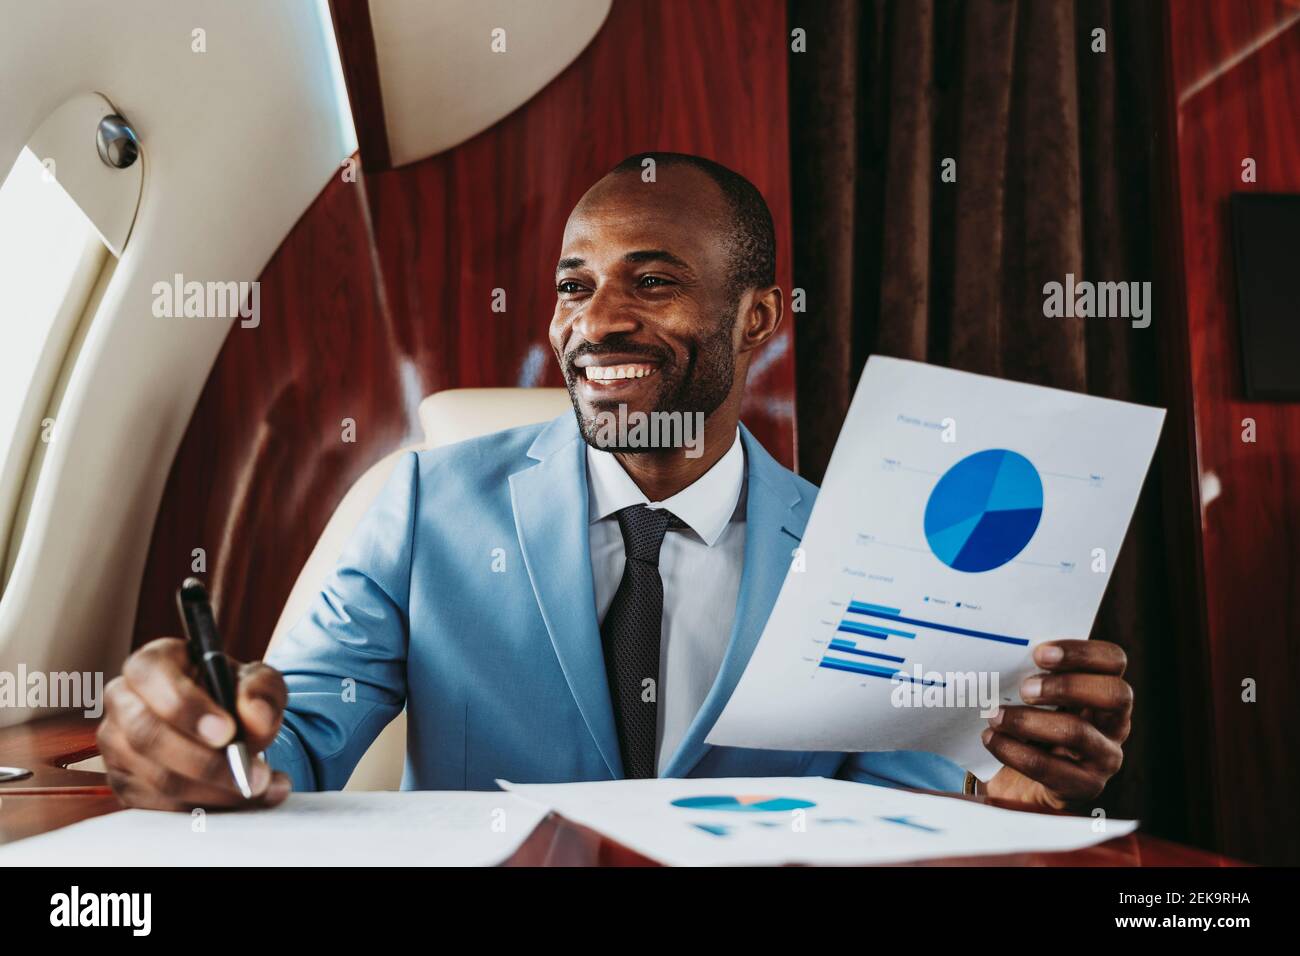 Smiling businessman looking away while holding pie chart in airplane Stock Photo